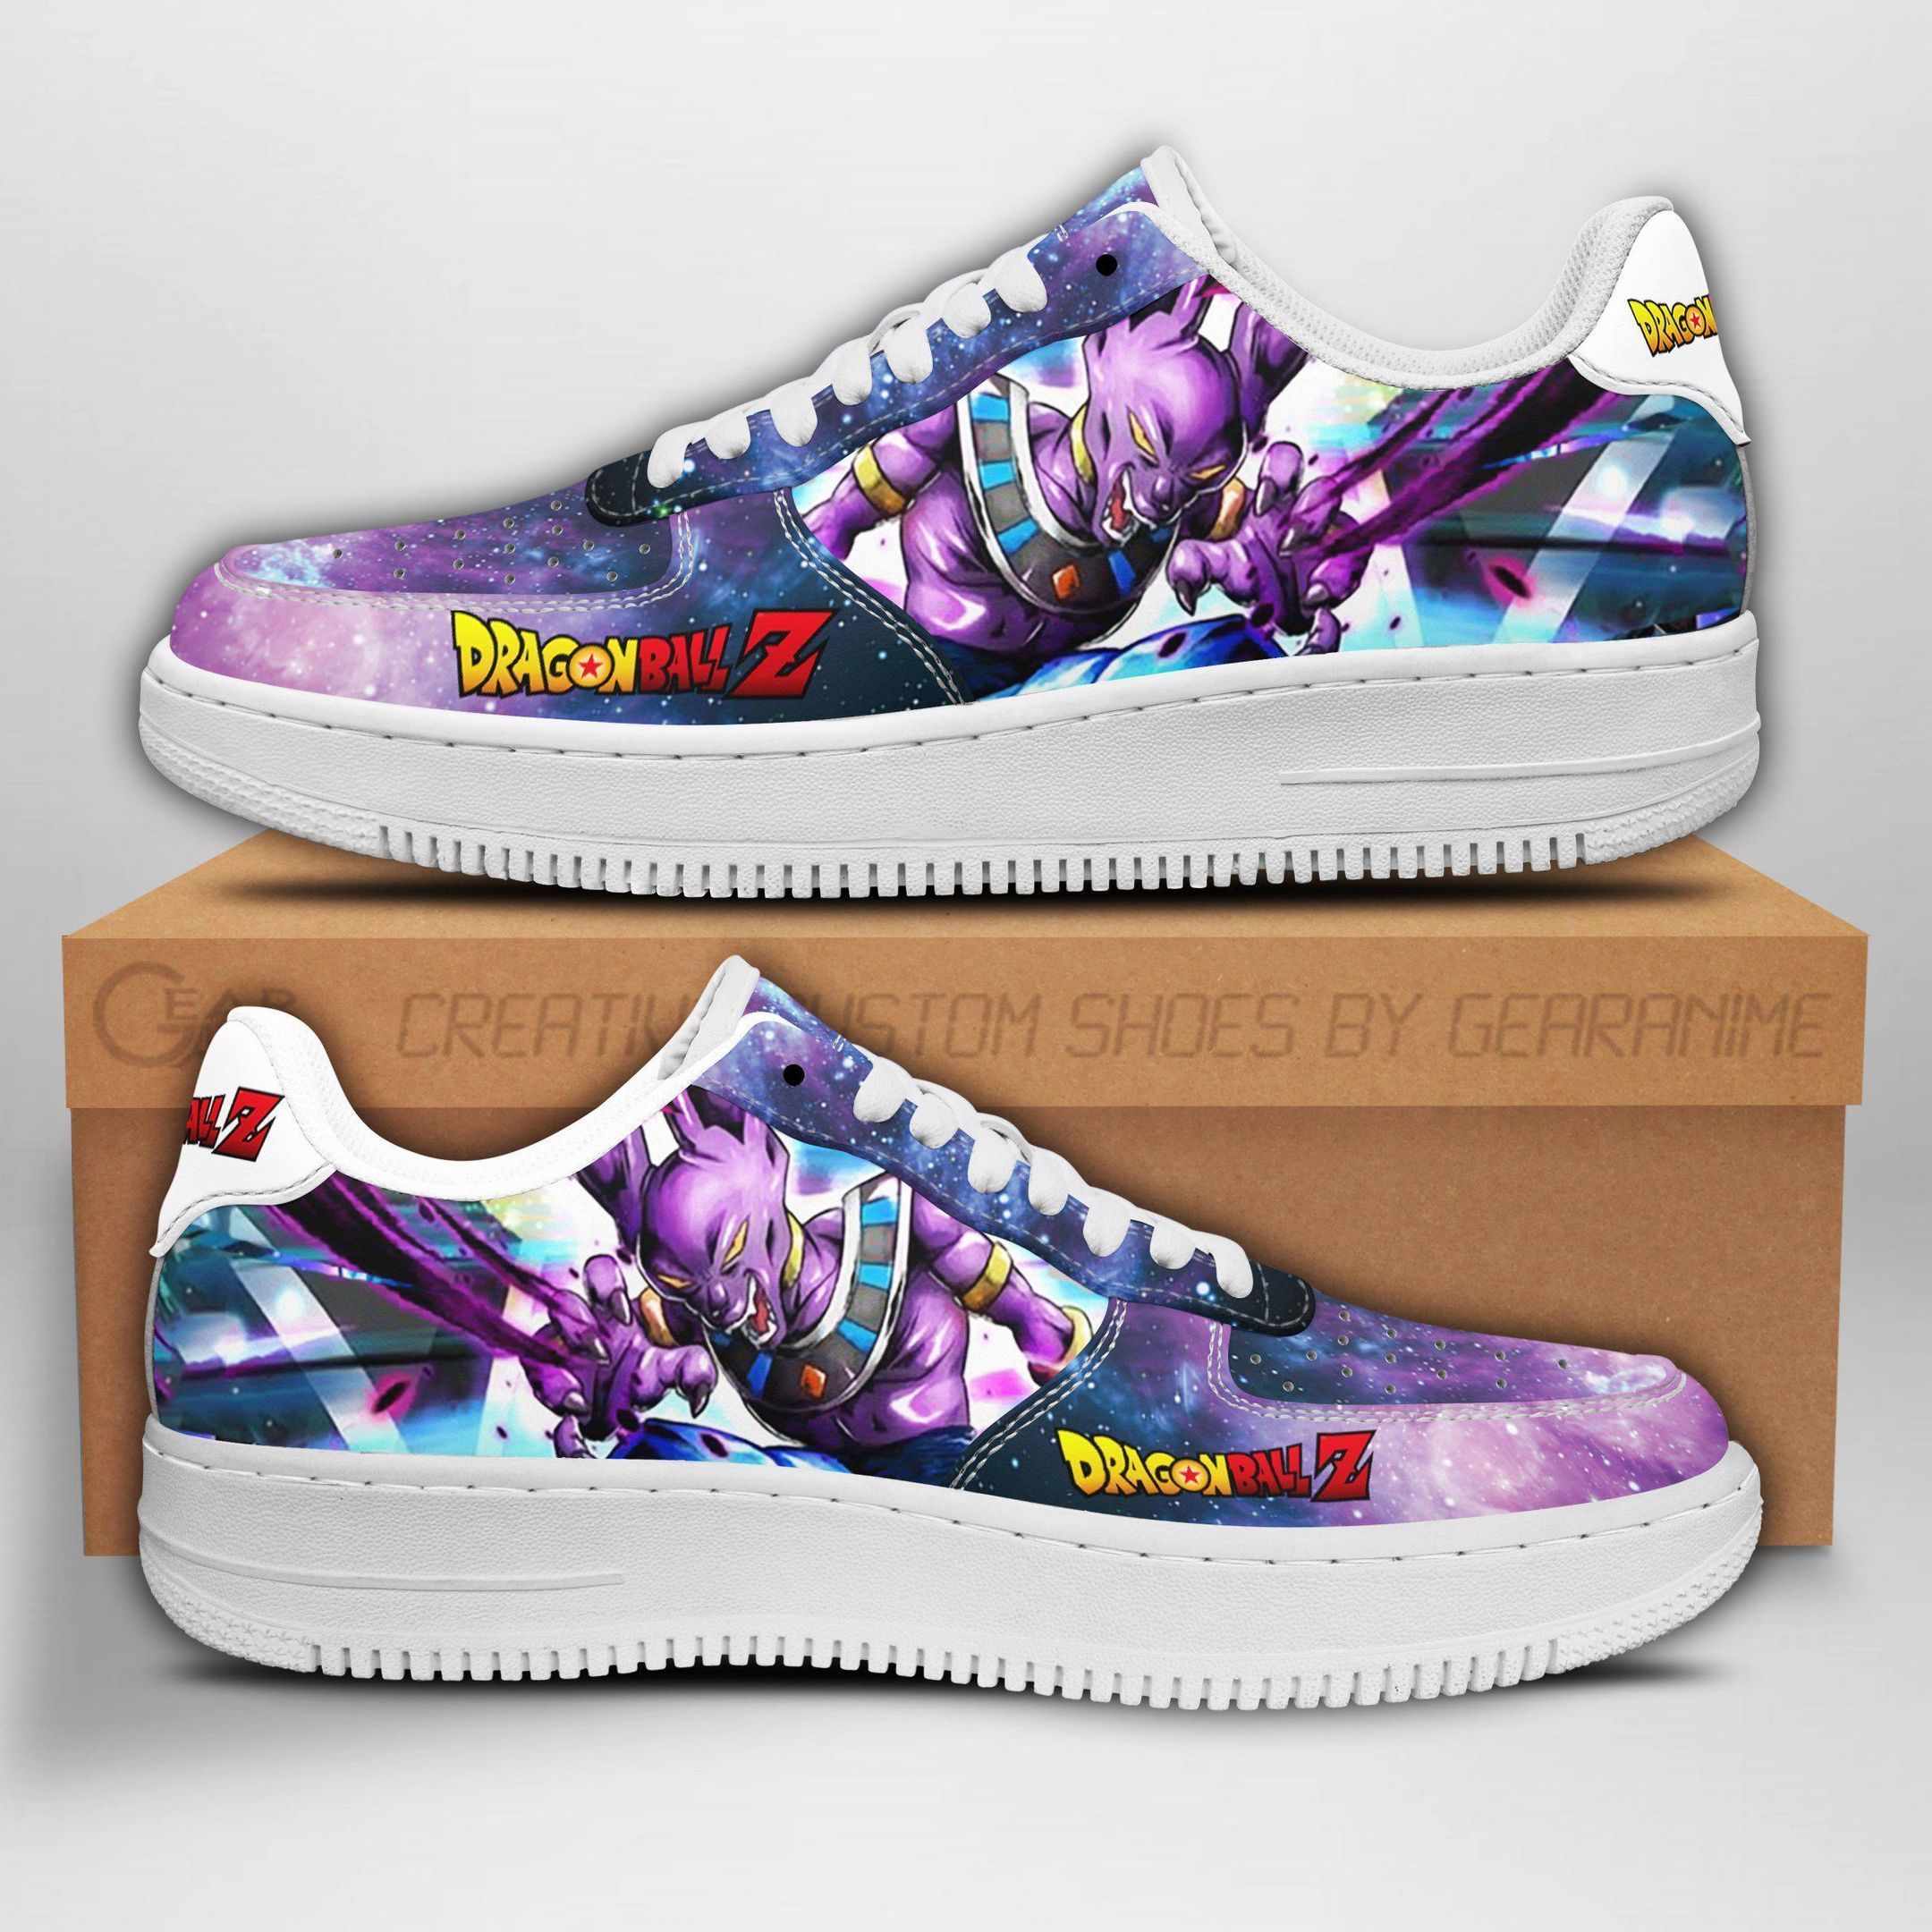 Beerus Air Shoes Dragon Ball Z Anime Shoes Fan Gift GO1012